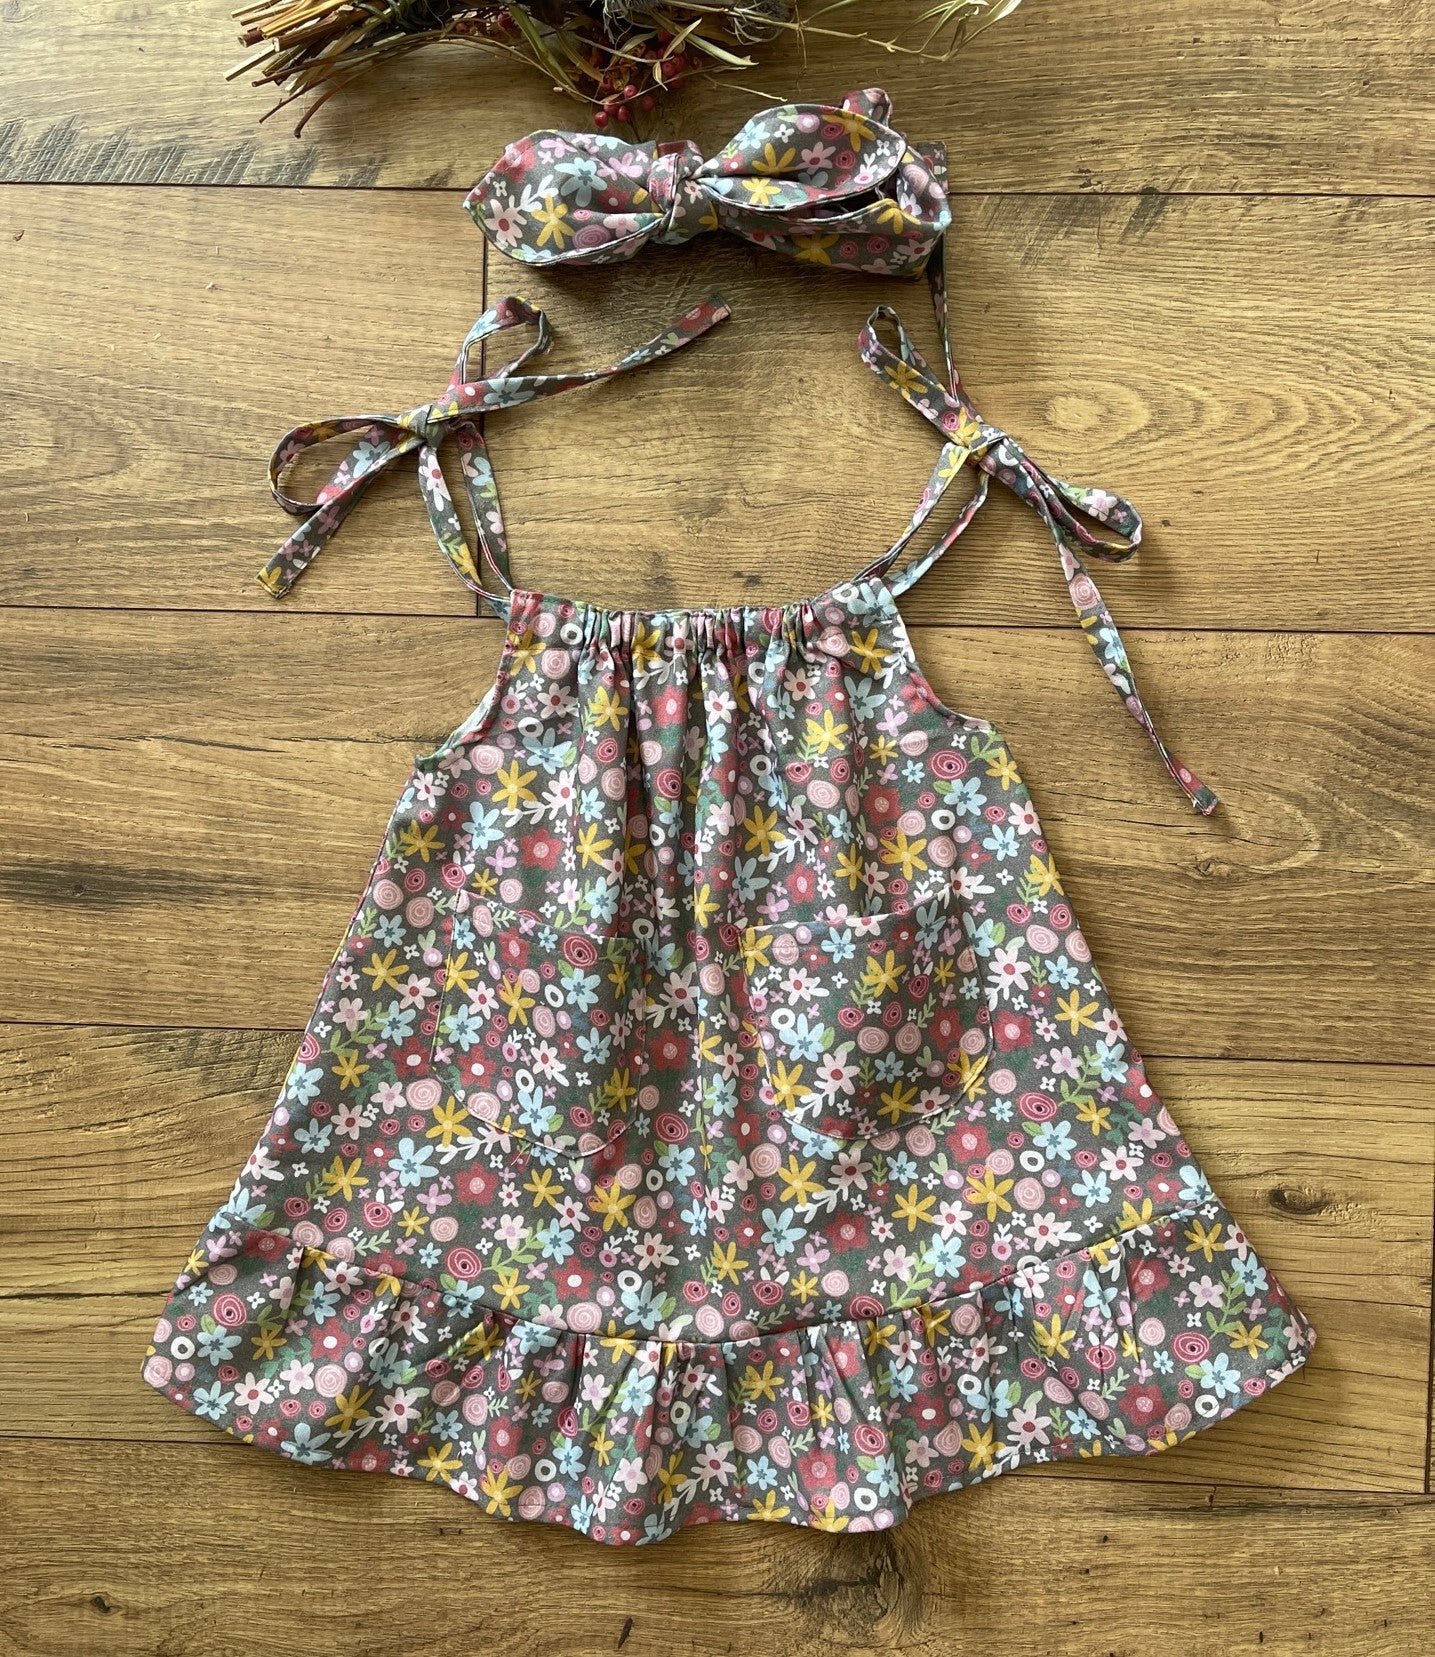 Girls Infant Toddler Floral Boho Sundress Pillowcase Style with Pockets and bottom ruffle